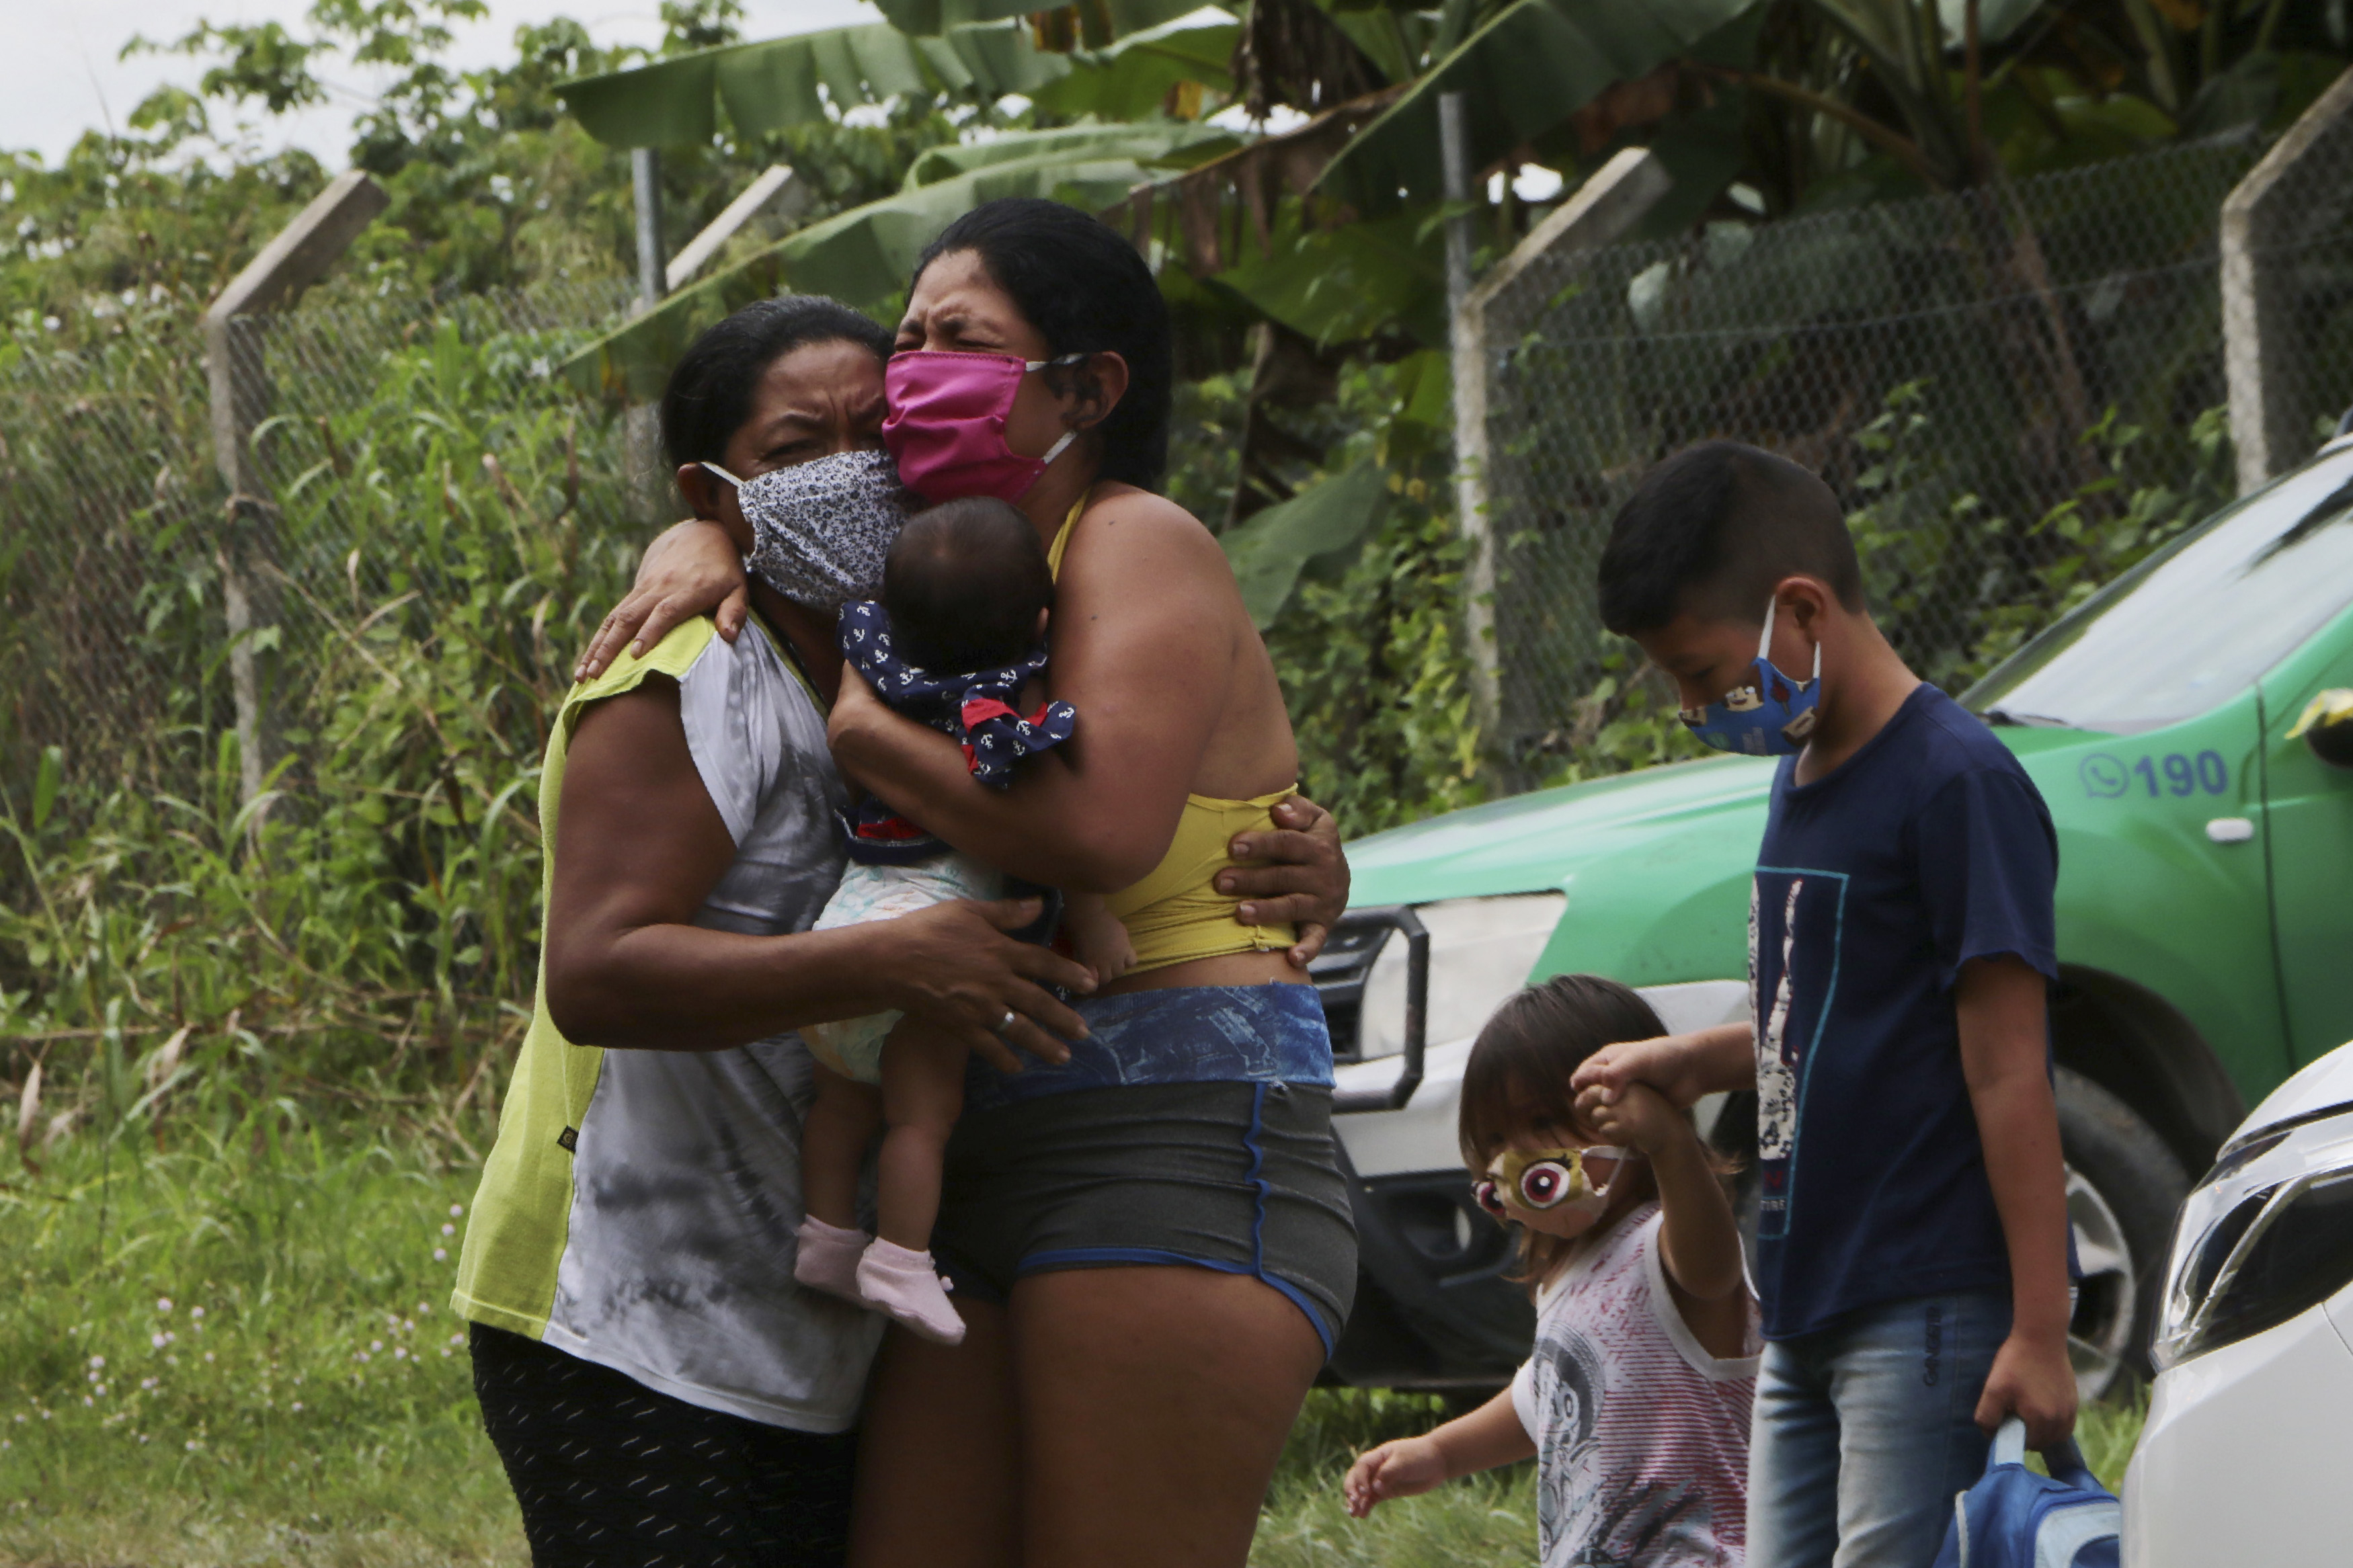 Relatives mourn at the roadside while waiting for funerary service workers to pick up of the body of Arlen Laranjeira Bezerra, 39, a victim of the new coronavirus who died after fleeing the emergency room of the Delphina Rinaldi Abdel Aziz Hospital in Manaus, Amazonas state, Brazil, Tuesday, May 5, 2020. Bezerra was admitted to undergo treatment for COVID-19 disease and after escaping from the hospital at dawn, his body was found by family members approximately 200 meters from it. Photo: AP